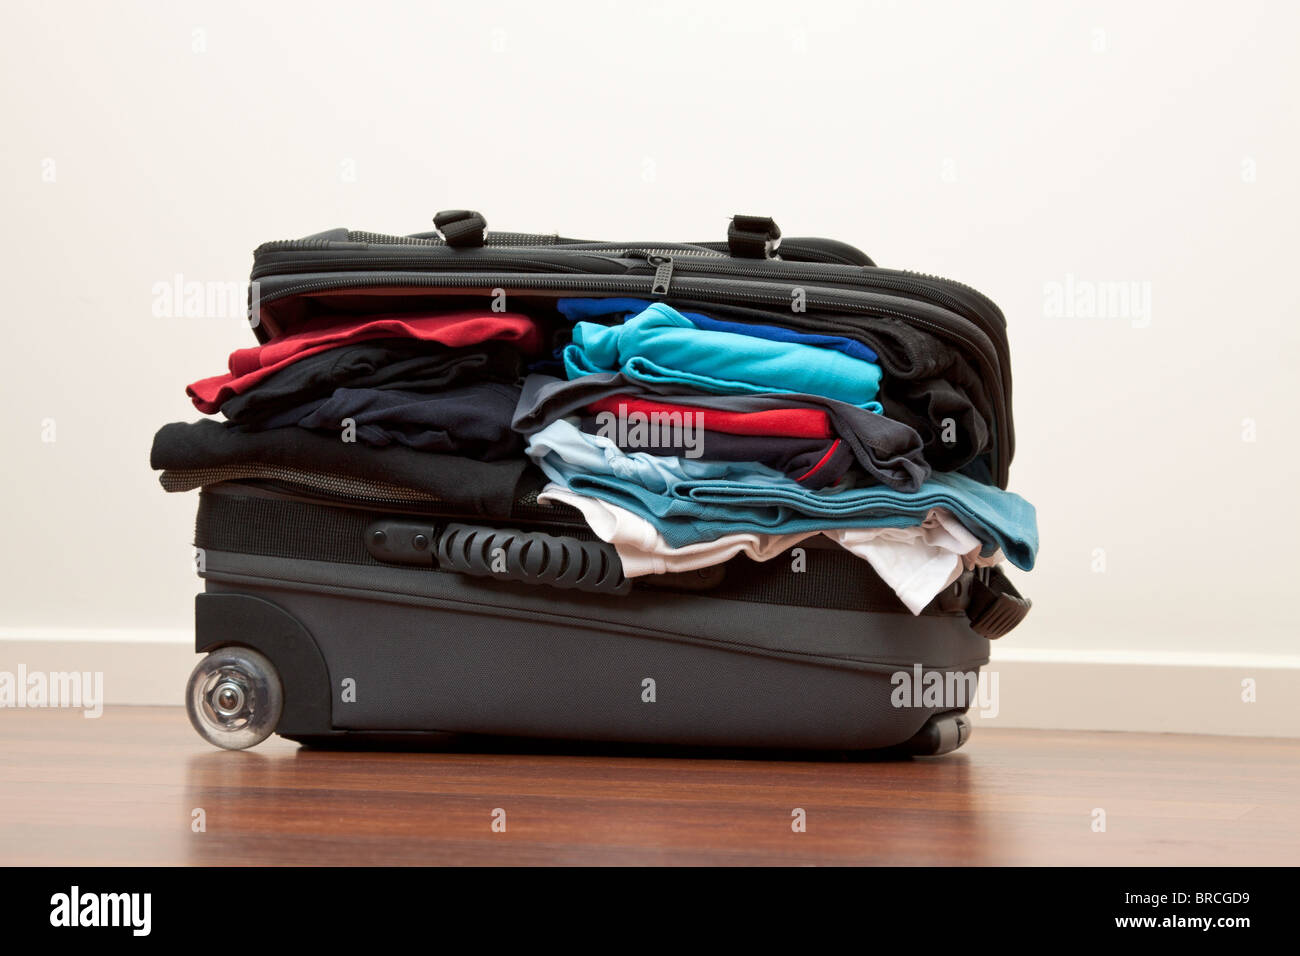 Suitcase stuffed with way to much clothes Stock Photo